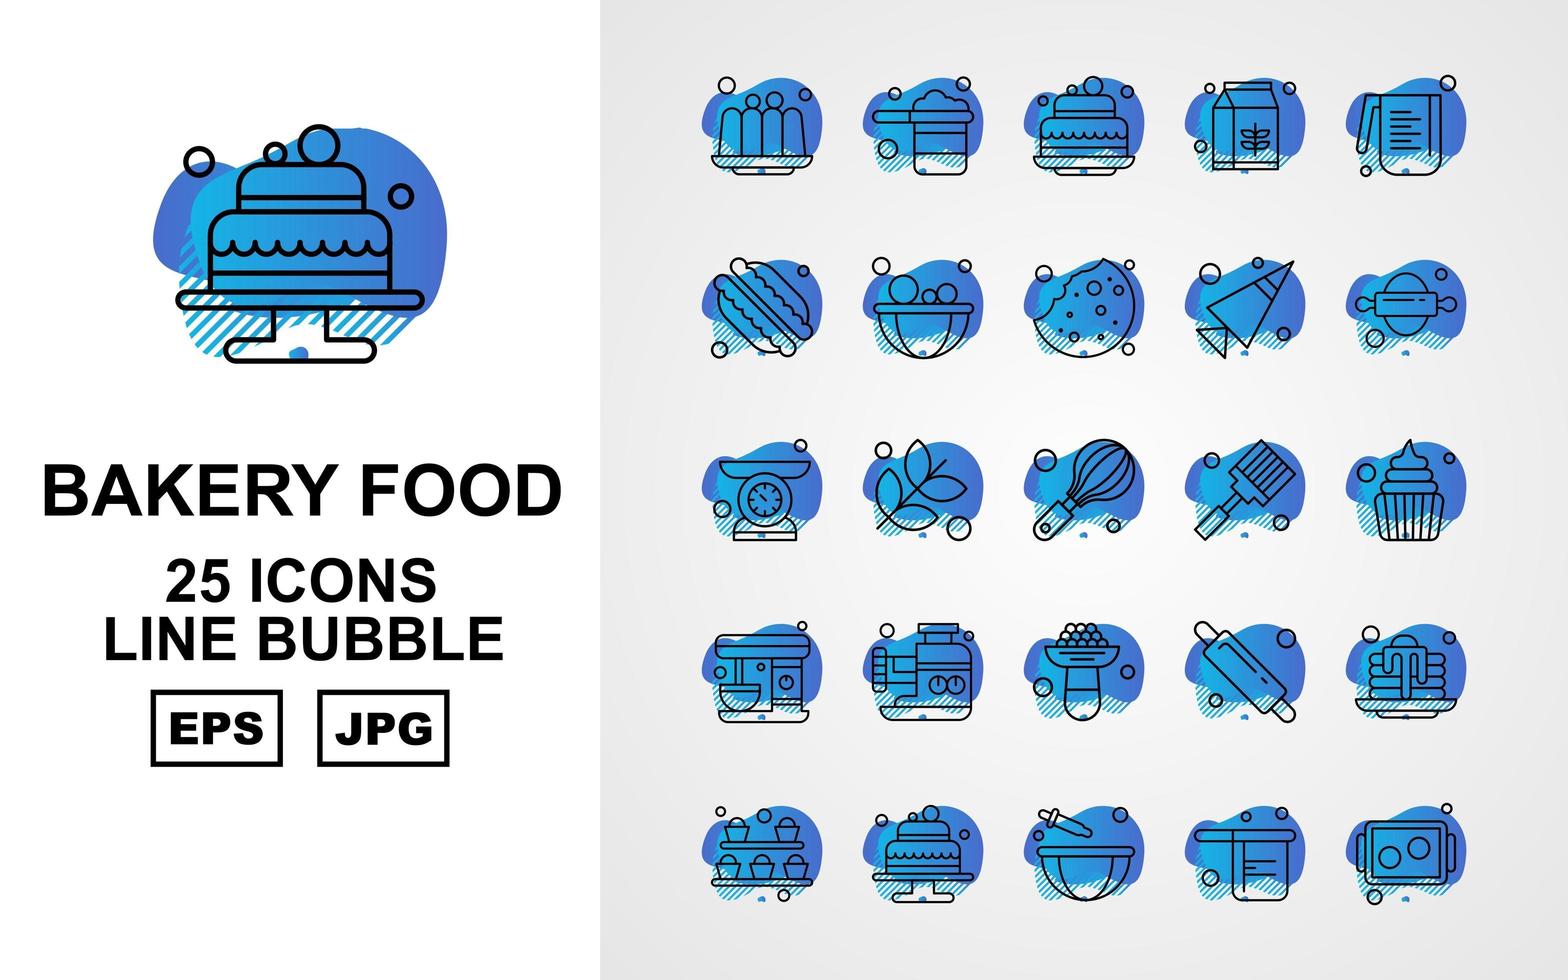 25 Premium Bakery Food Line Bubble Icon Pack vector